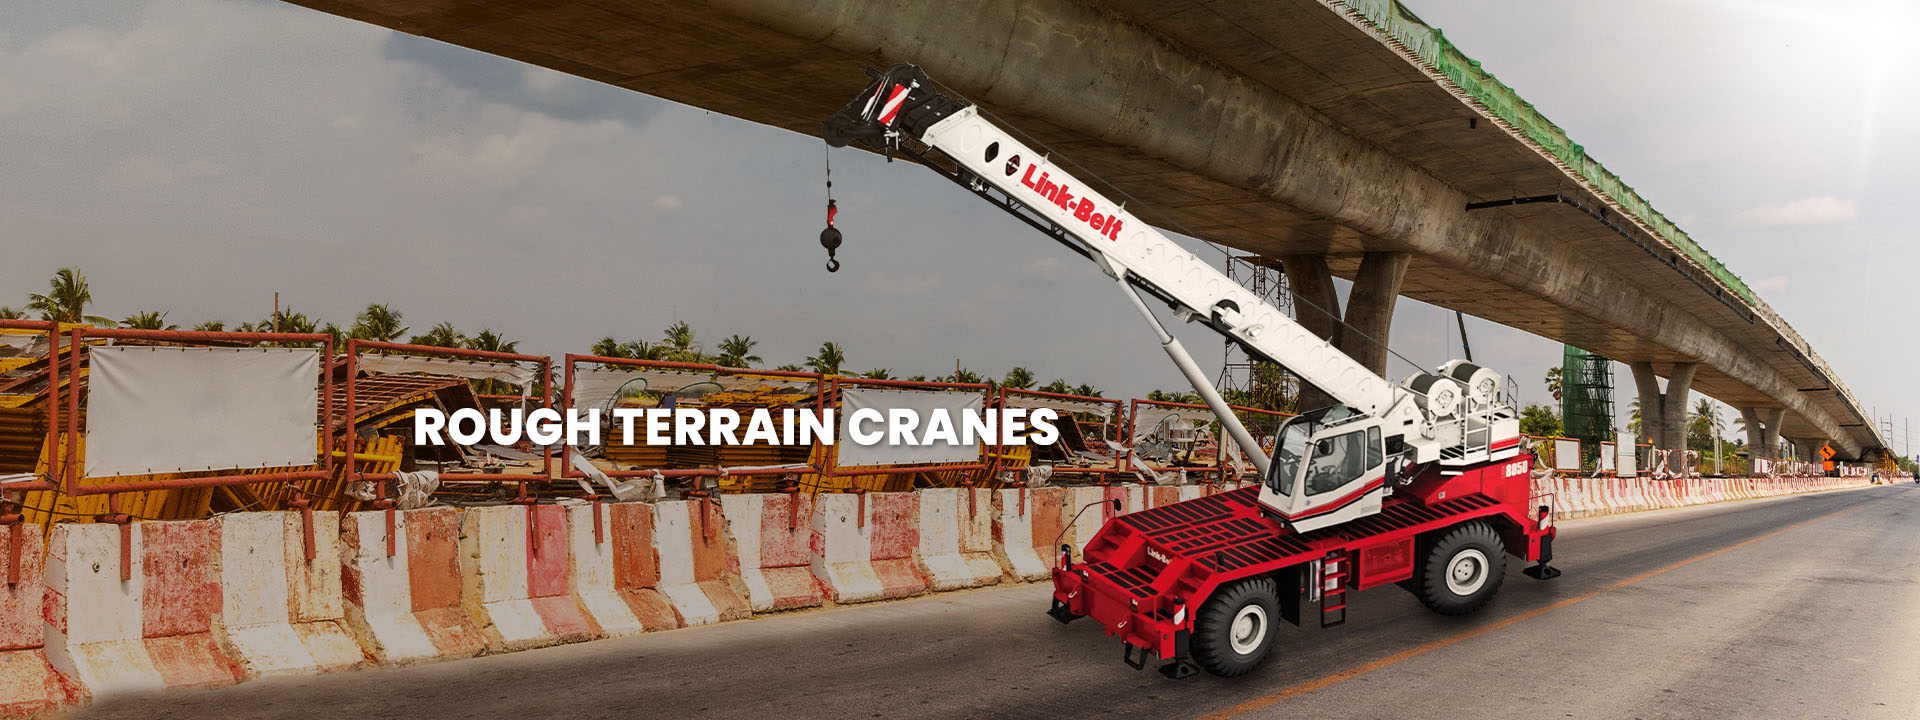 3 4 main types of mobile cranes commonly used in construction